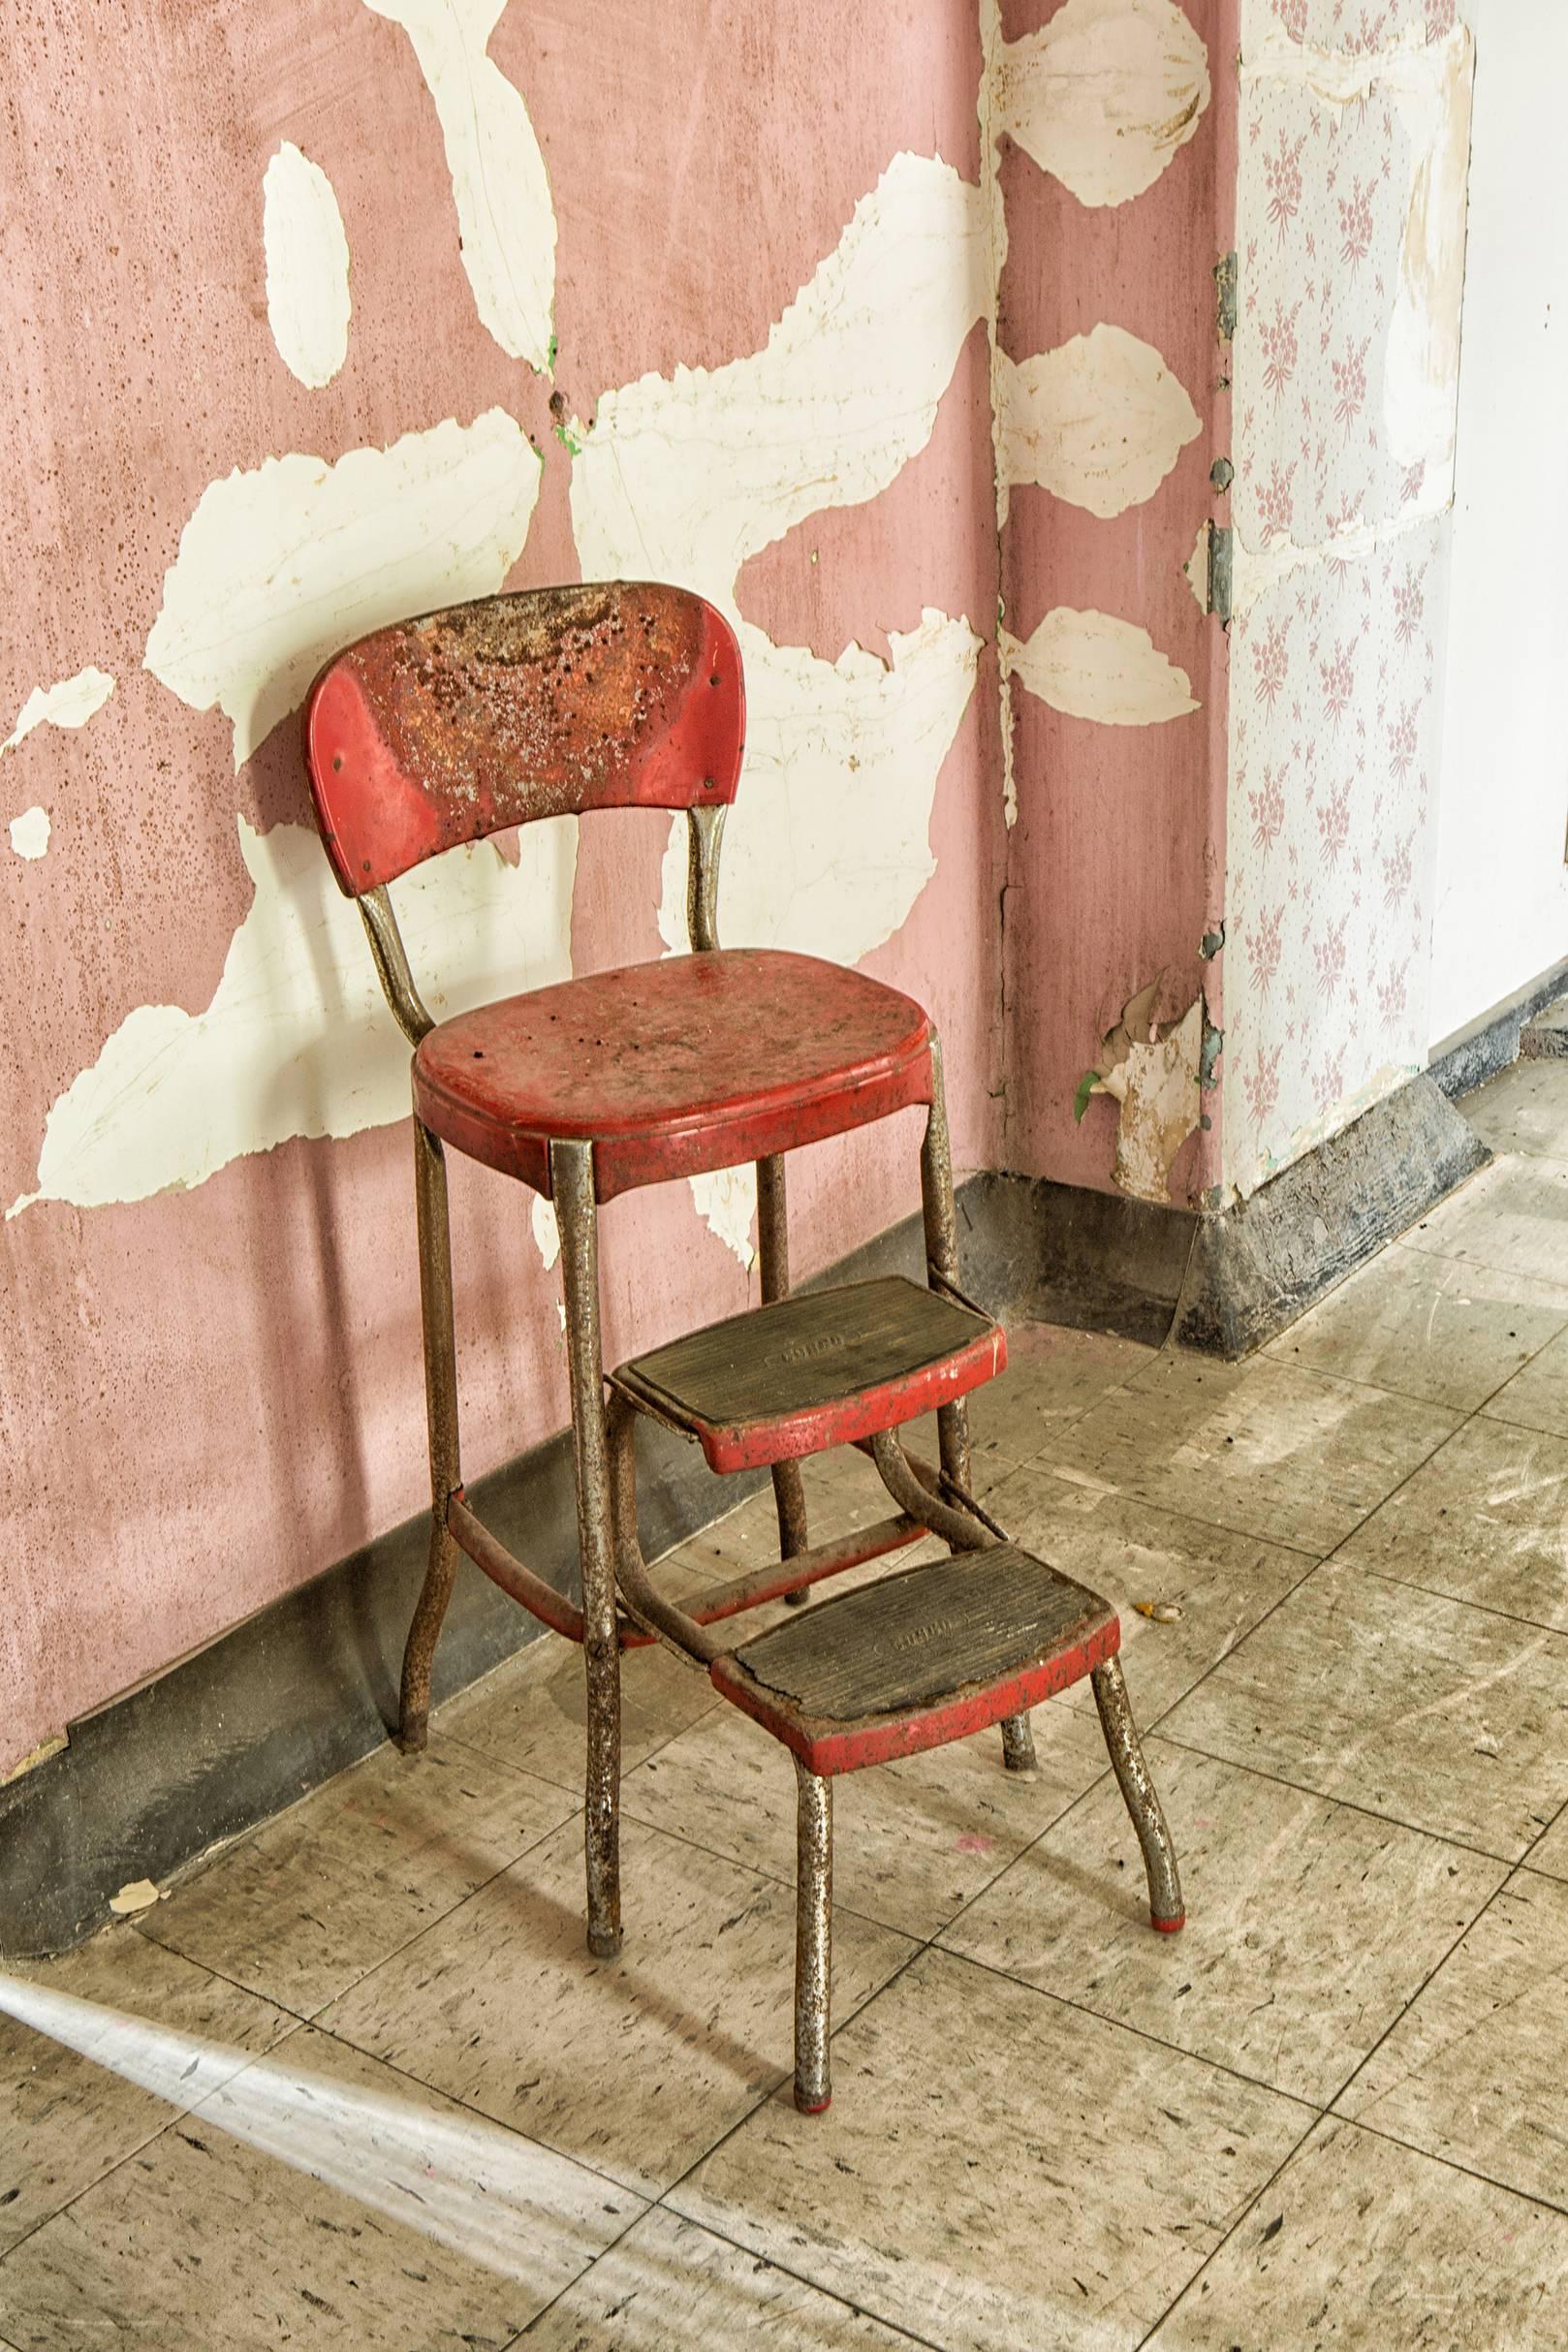 Rebecca Skinner Still-Life Photograph - "Absent", abandoned, metal print, vintage, chair, red, pink, color photograph